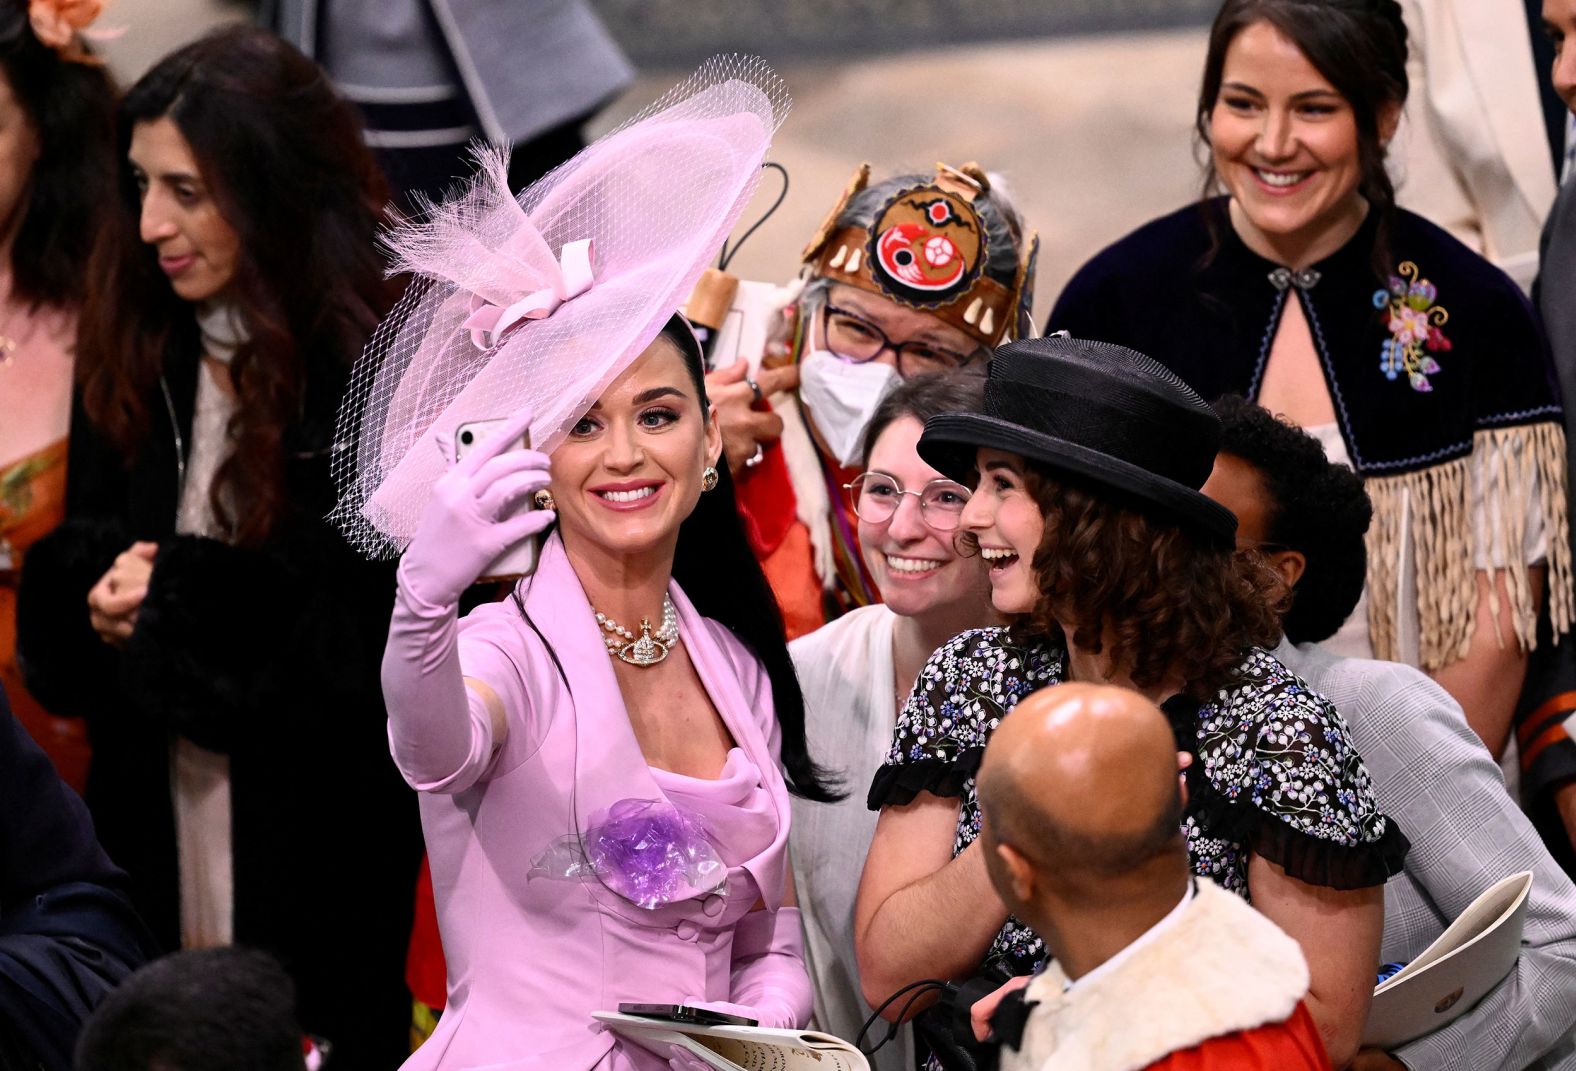 Singer Katy Perry takes a selfie with guests at Westminster Abbey. The coronation guests included <a href="index.php?page=&url=https%3A%2F%2Fwww.cnn.com%2Fuk%2Flive-news%2Fking-charles-iii-coronation-ckc-intl-gbr%2Fh_6381e2bc126c139f48714994a44b7510" target="_blank">celebrities and world leaders</a>.